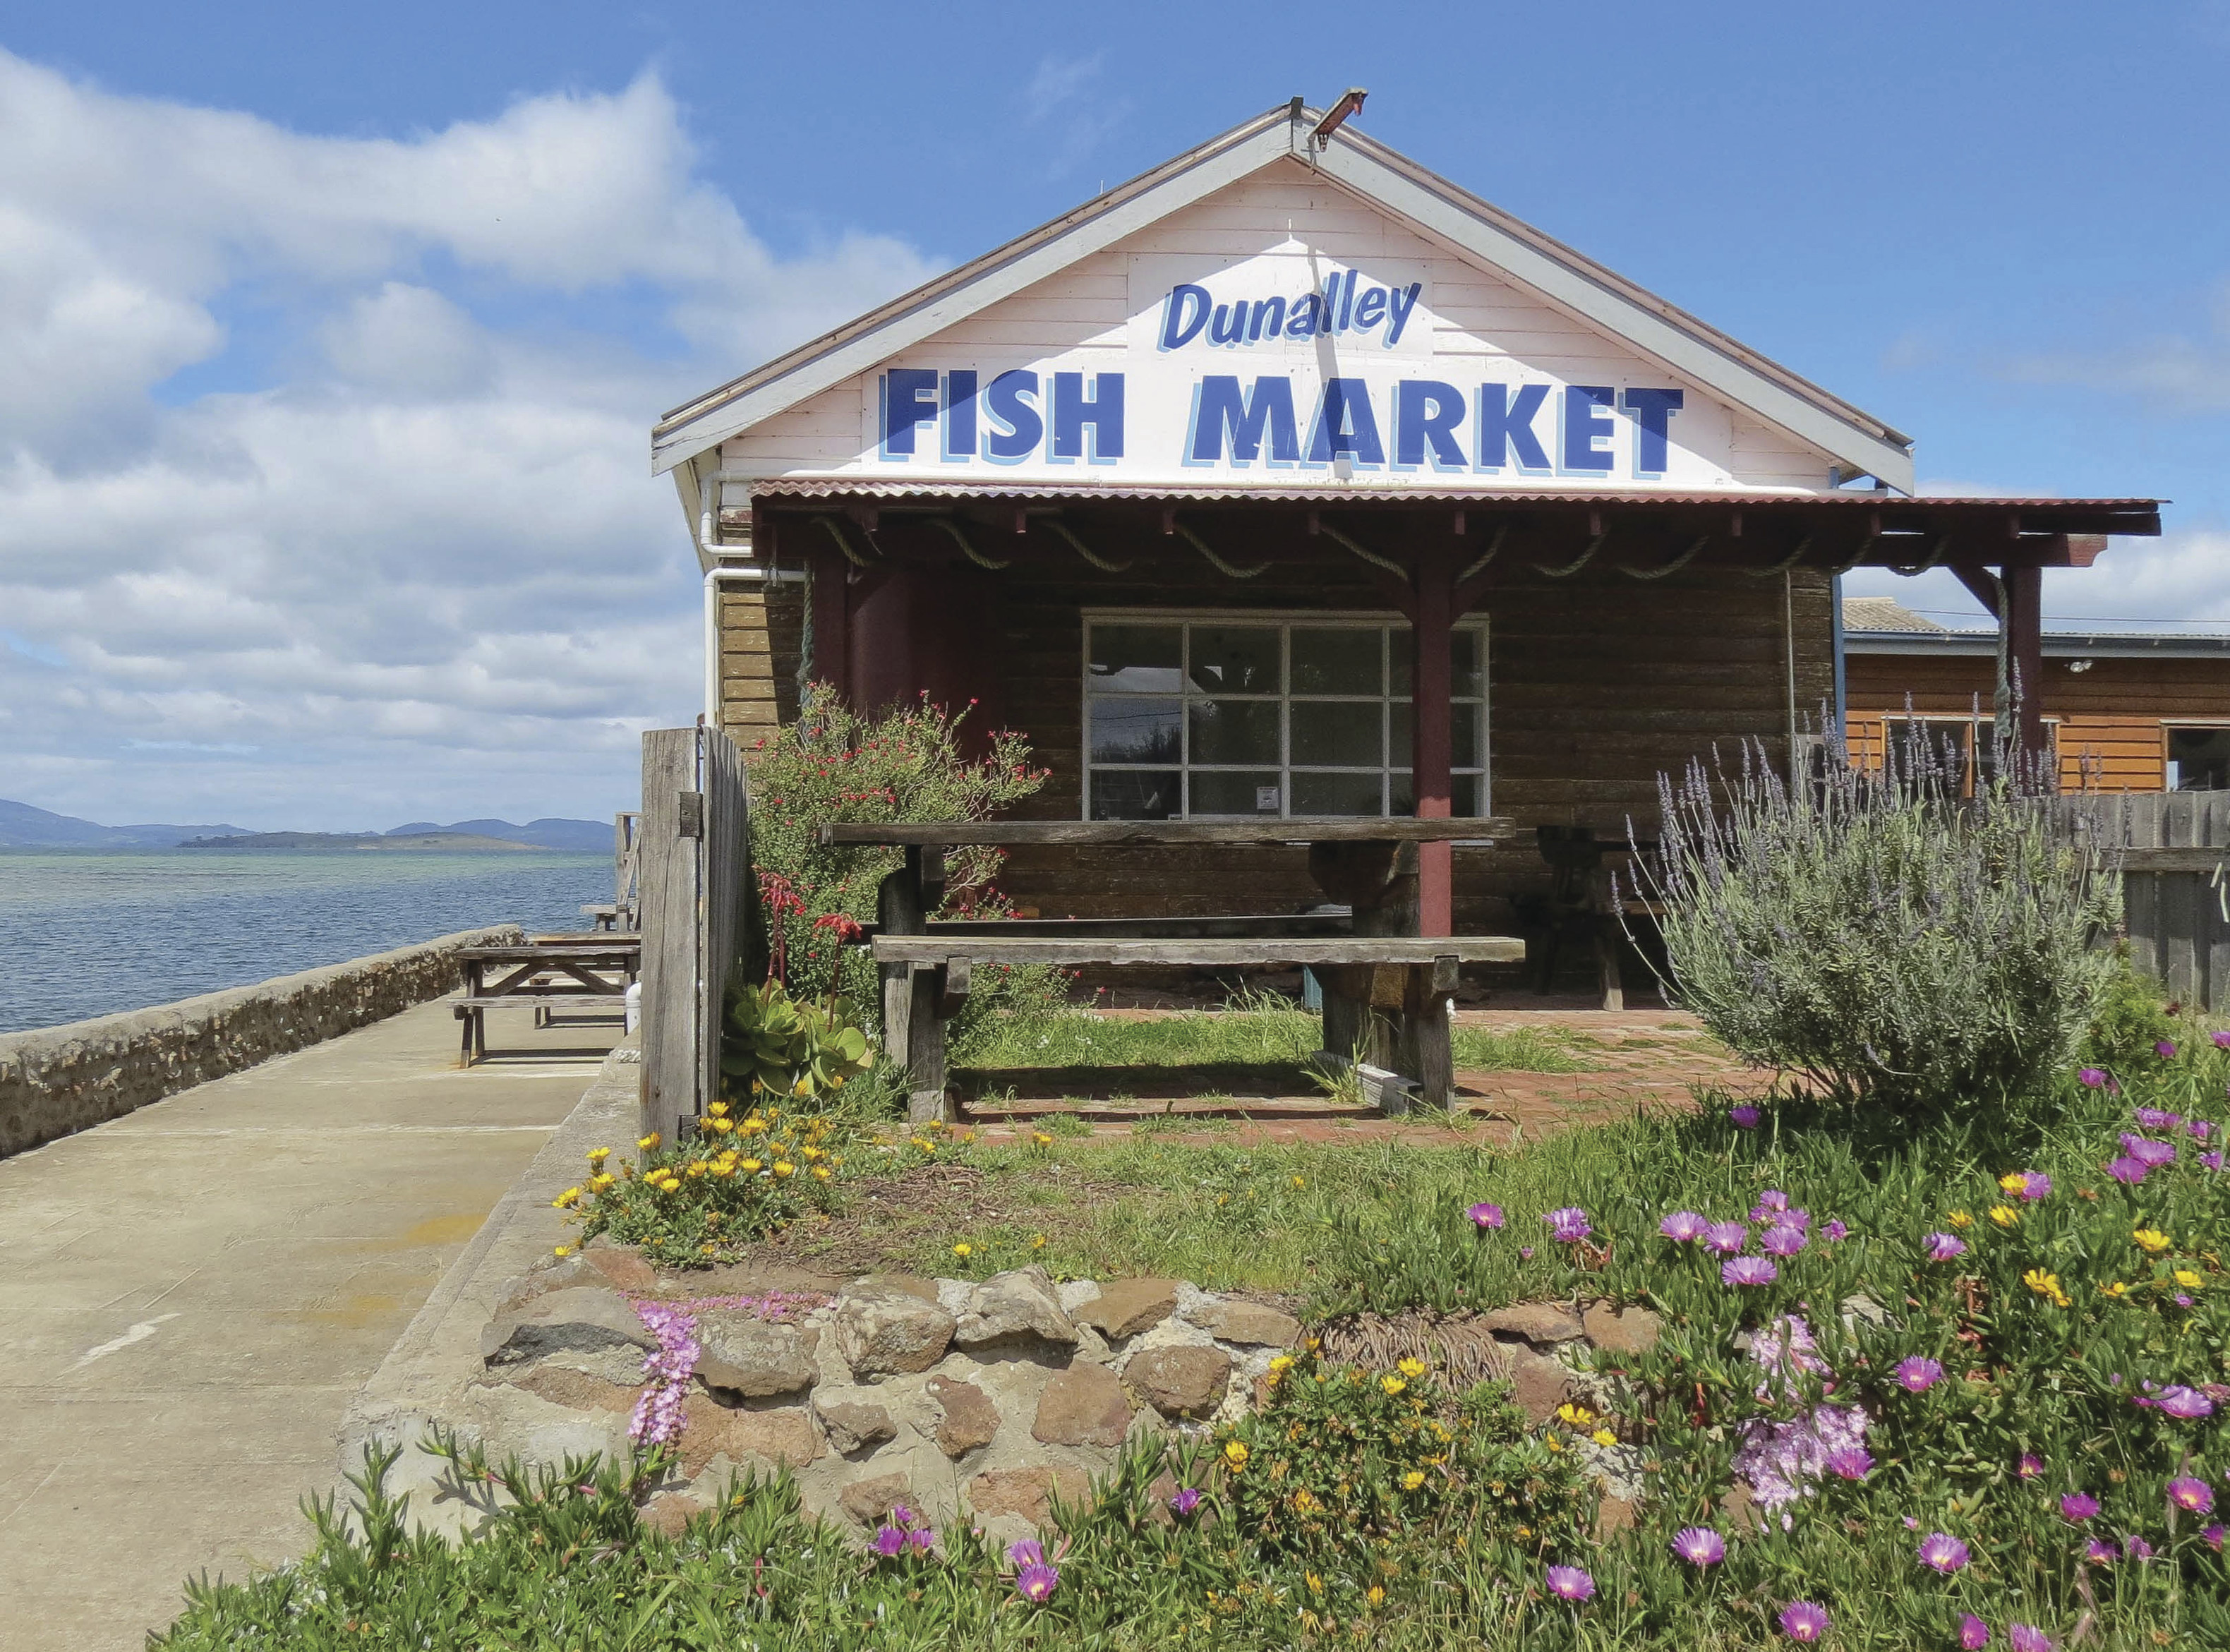 Exterior of Dunalley Fish Market, placed on the waterfront with blue signage painted in blue on the building roof. Benches to sit on outside.